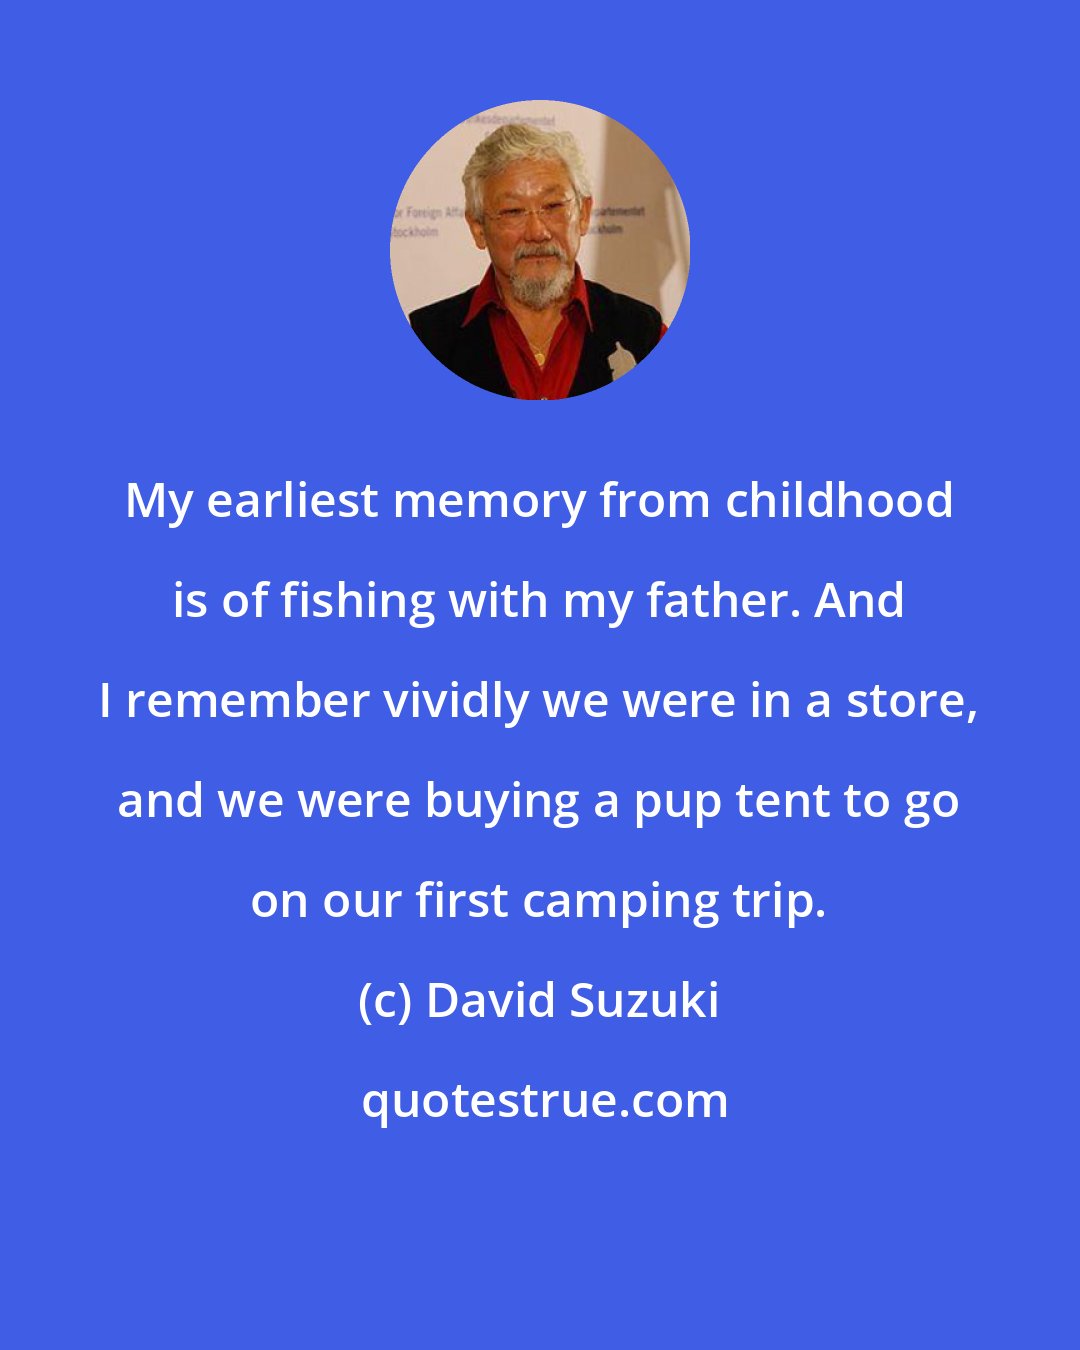 David Suzuki: My earliest memory from childhood is of fishing with my father. And I remember vividly we were in a store, and we were buying a pup tent to go on our first camping trip.